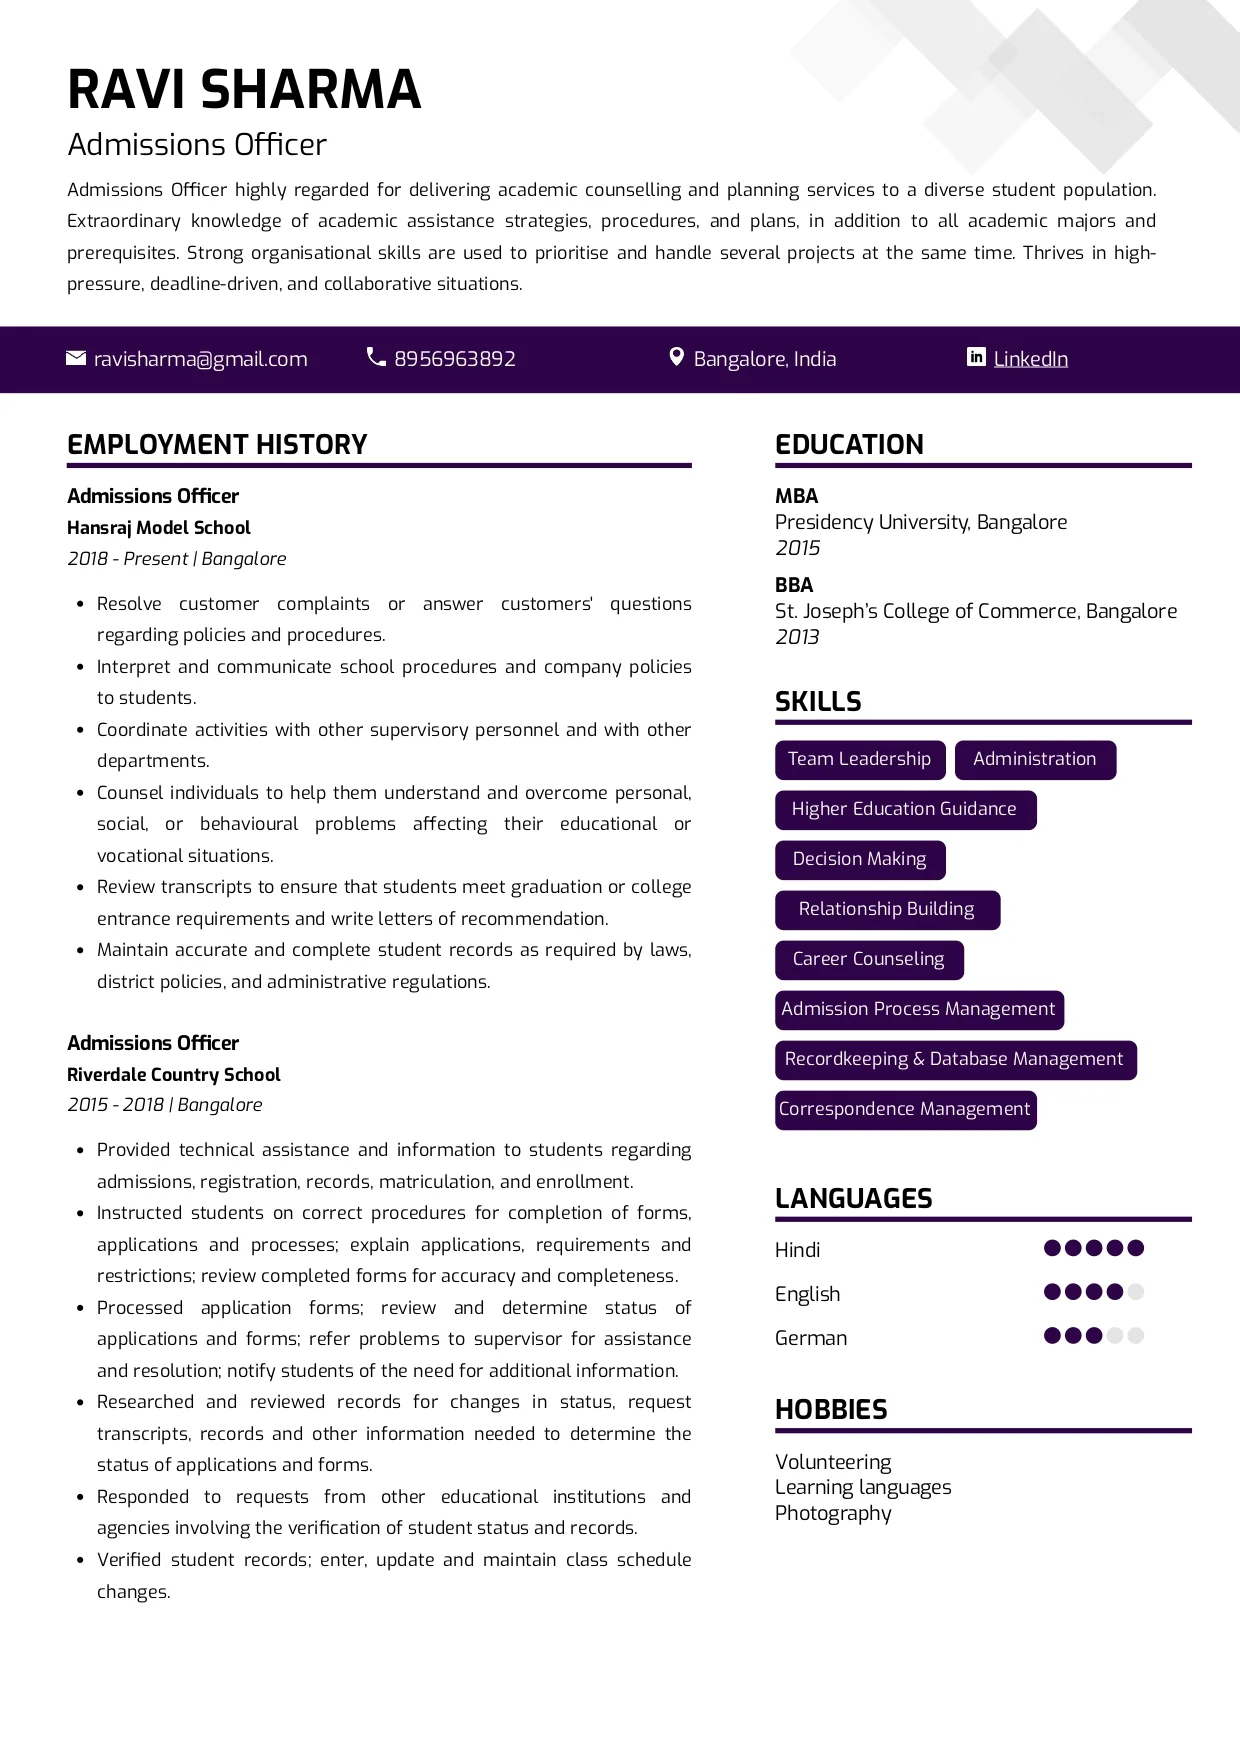 Sample Resume of Admissions Officer | Free Resume Templates & Samples on Resumod.co